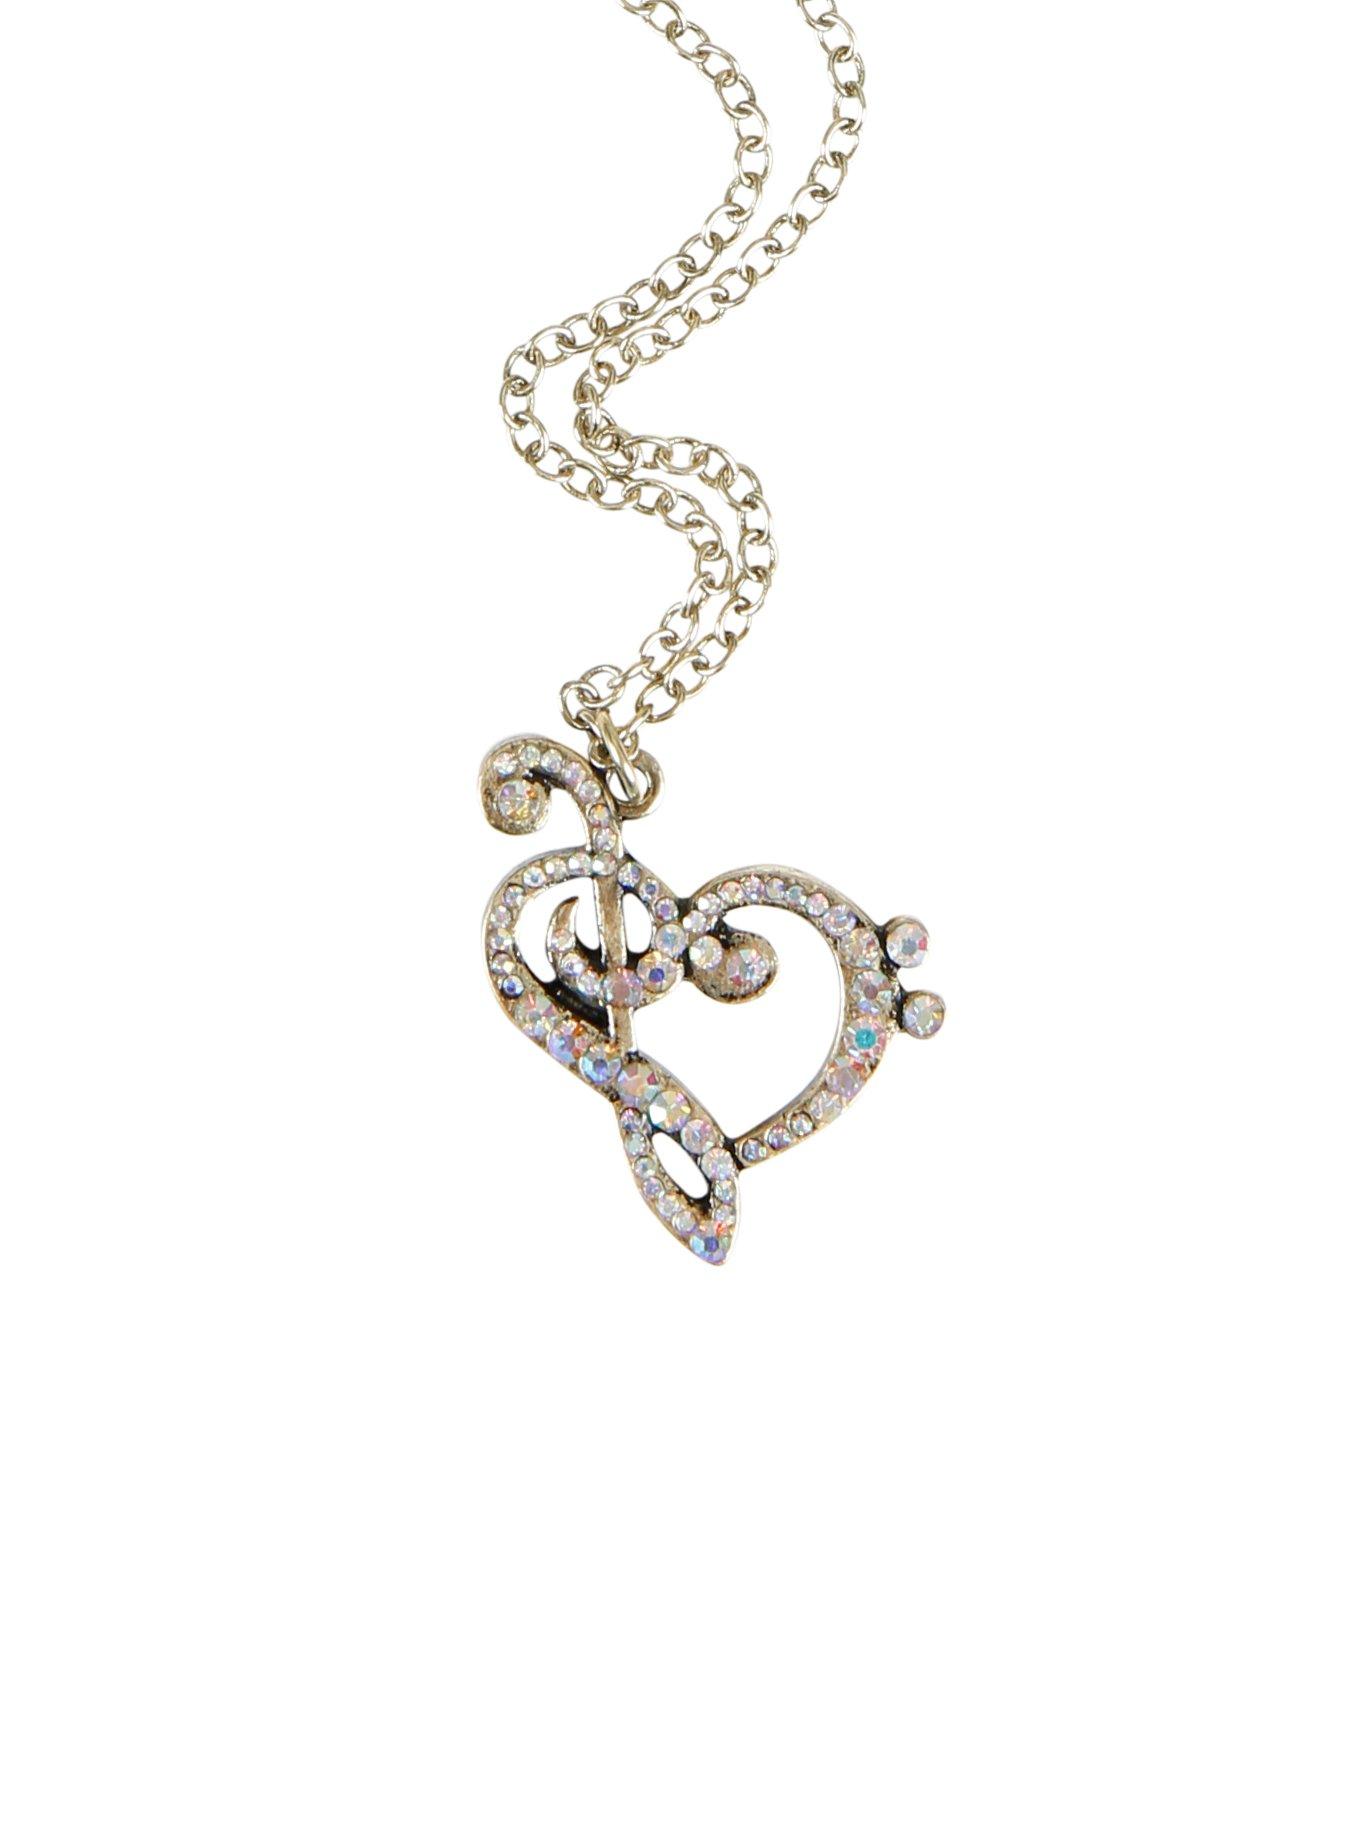 Blackheart Gold Tone Bling Clef Heart Necklace, , hi-res